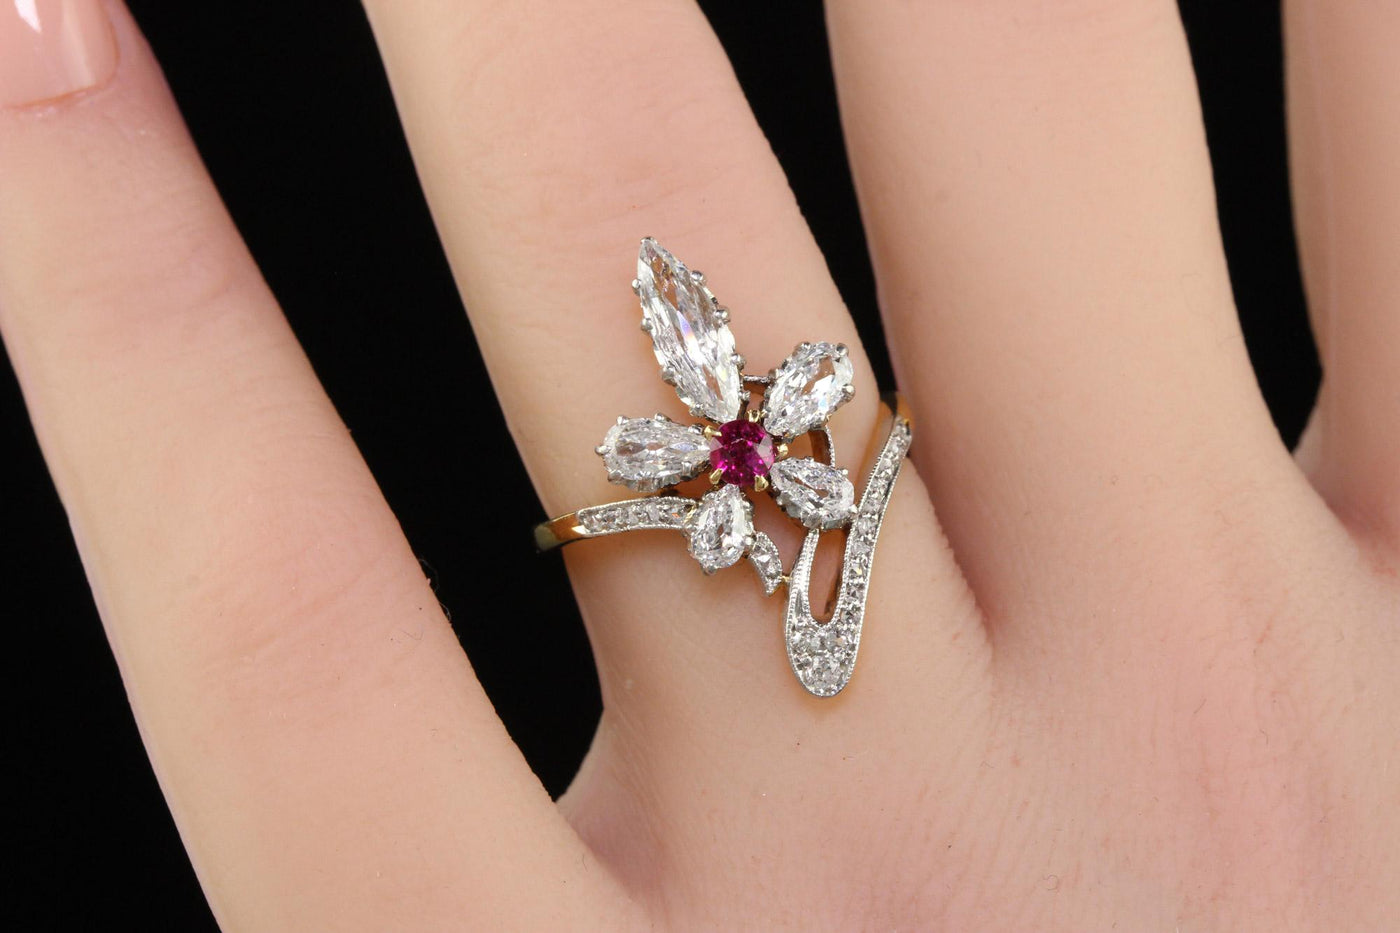 Antique Edwardian 18K Gold and Platinum Old Marquise Diamond Ruby Cocktail Ring